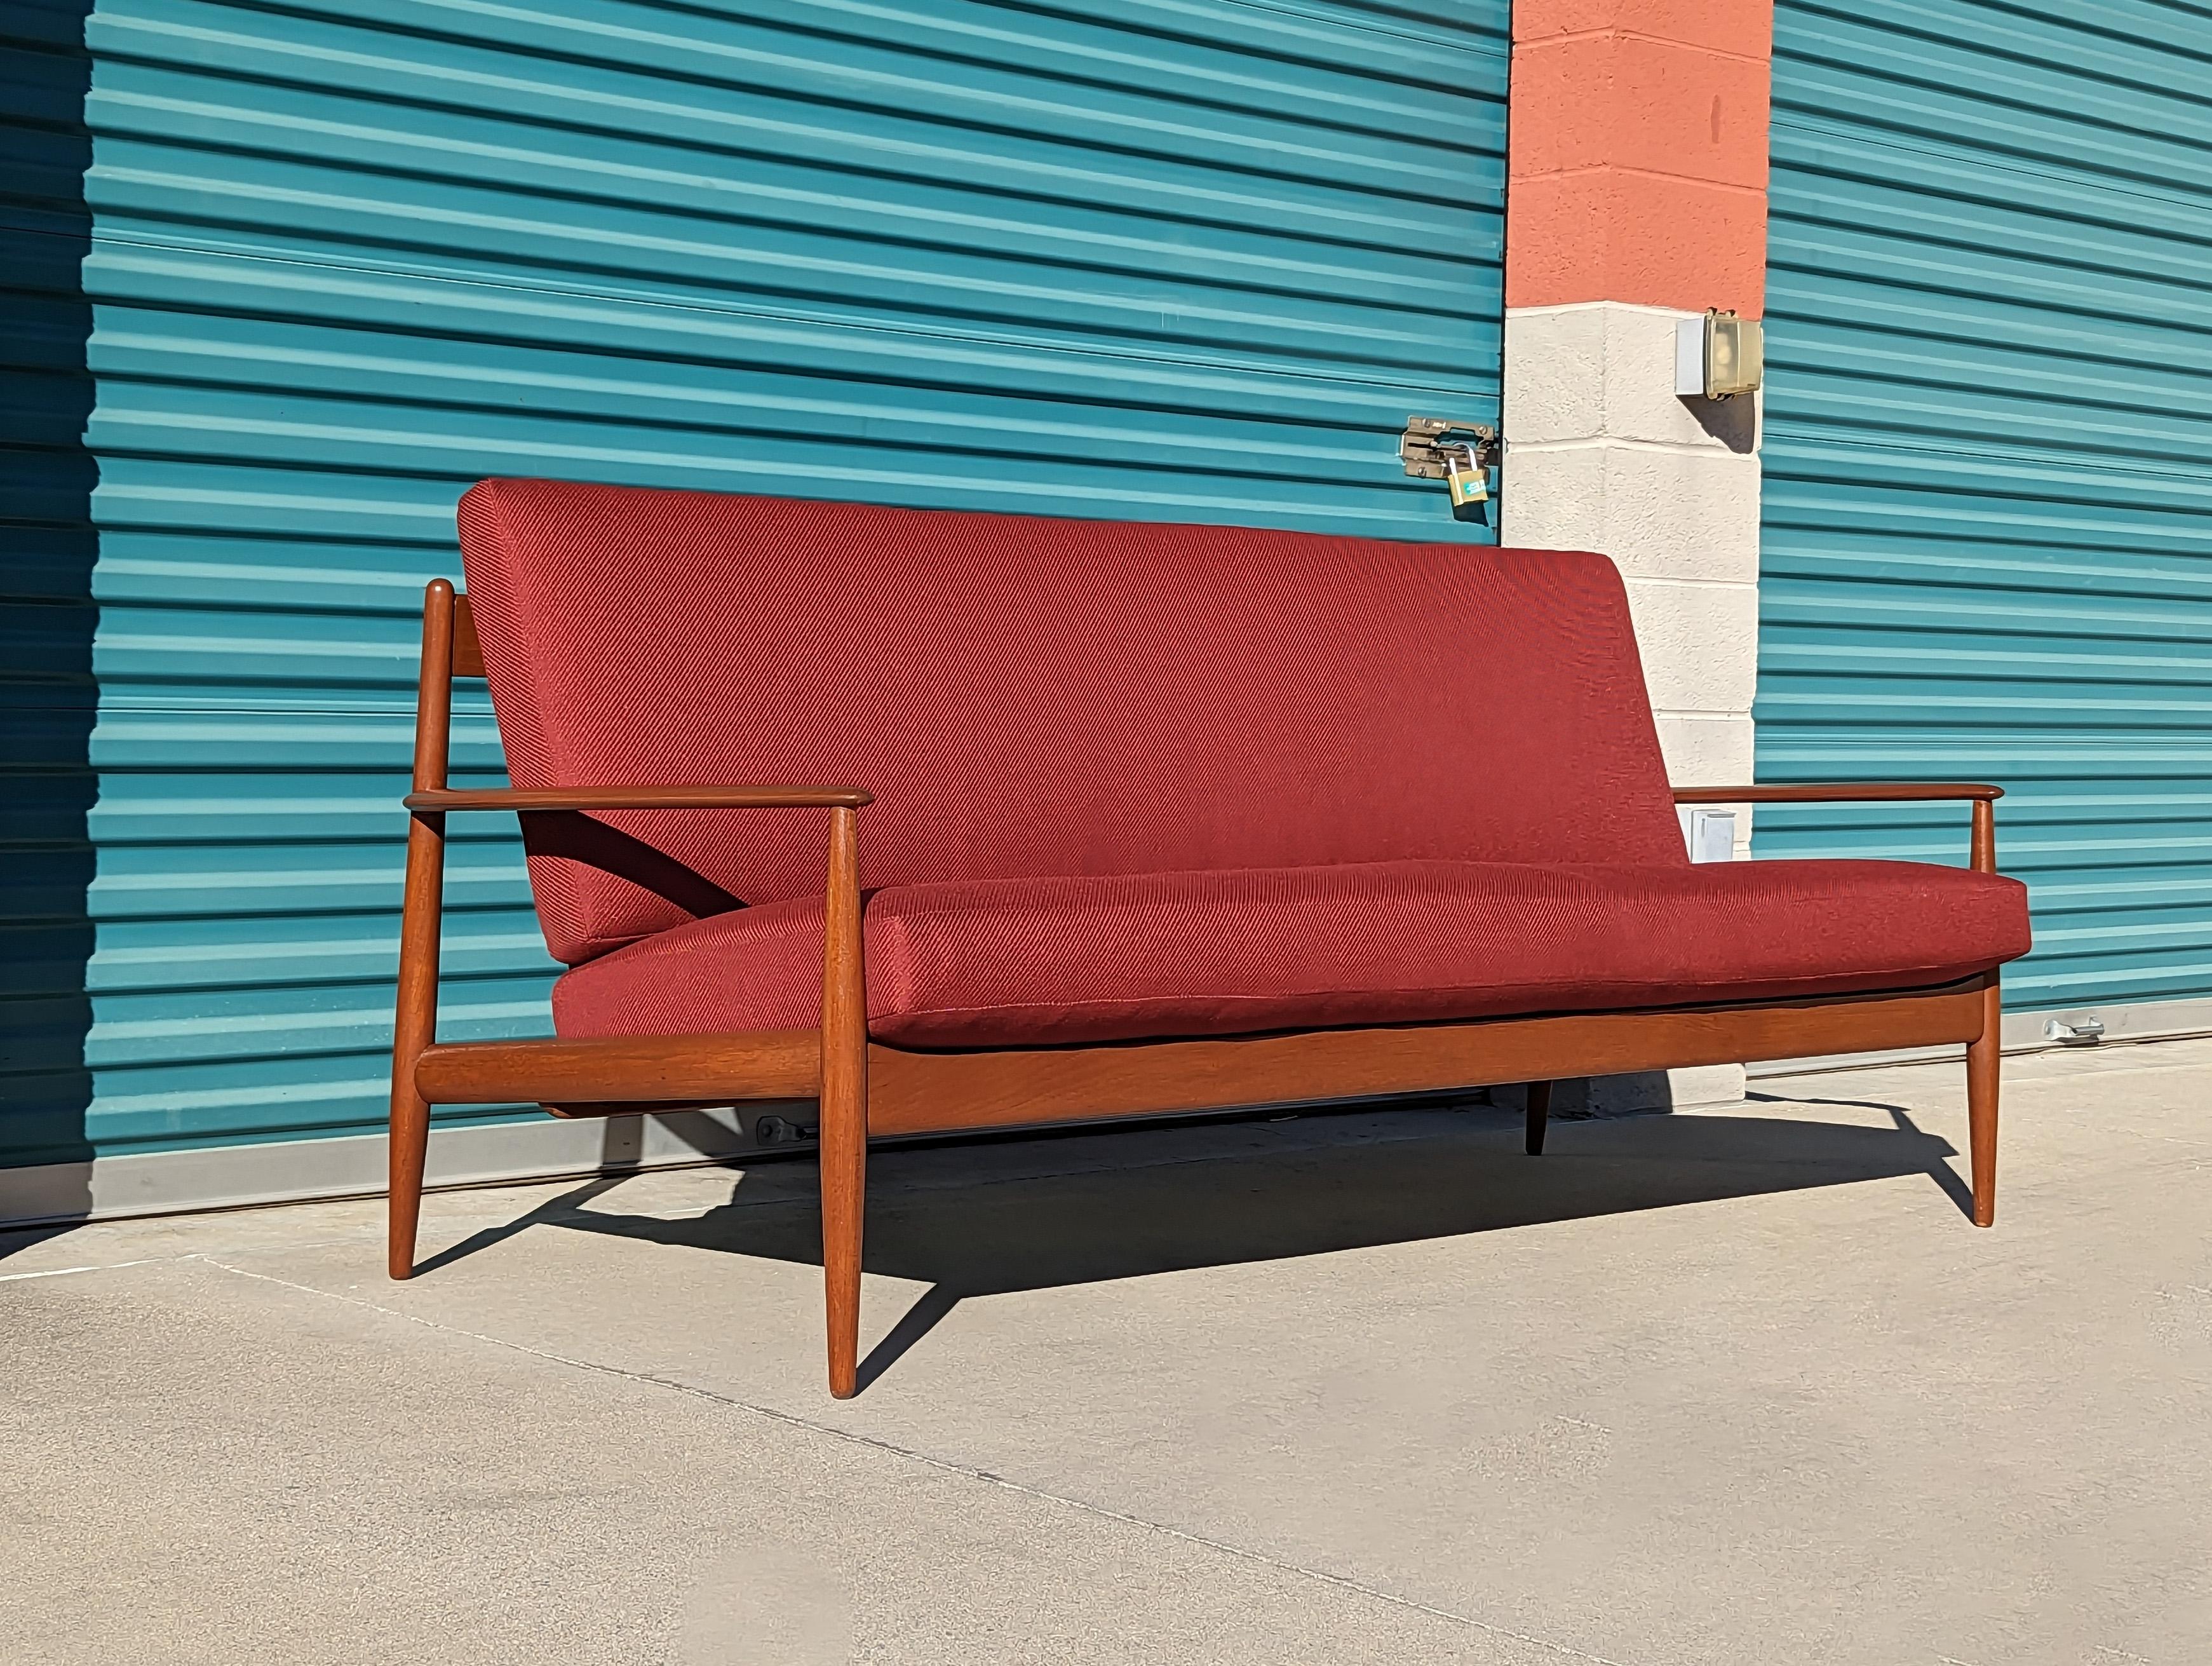 Just in: Exquisite 1950s Teak Sofa by Grete Jalk for France & Søn - Refinished and Newly Reupholstered!

Capture the essence of mid-century elegance with this stunning teak sofa, a timeless masterpiece designed by the renowned Danish designer Grete